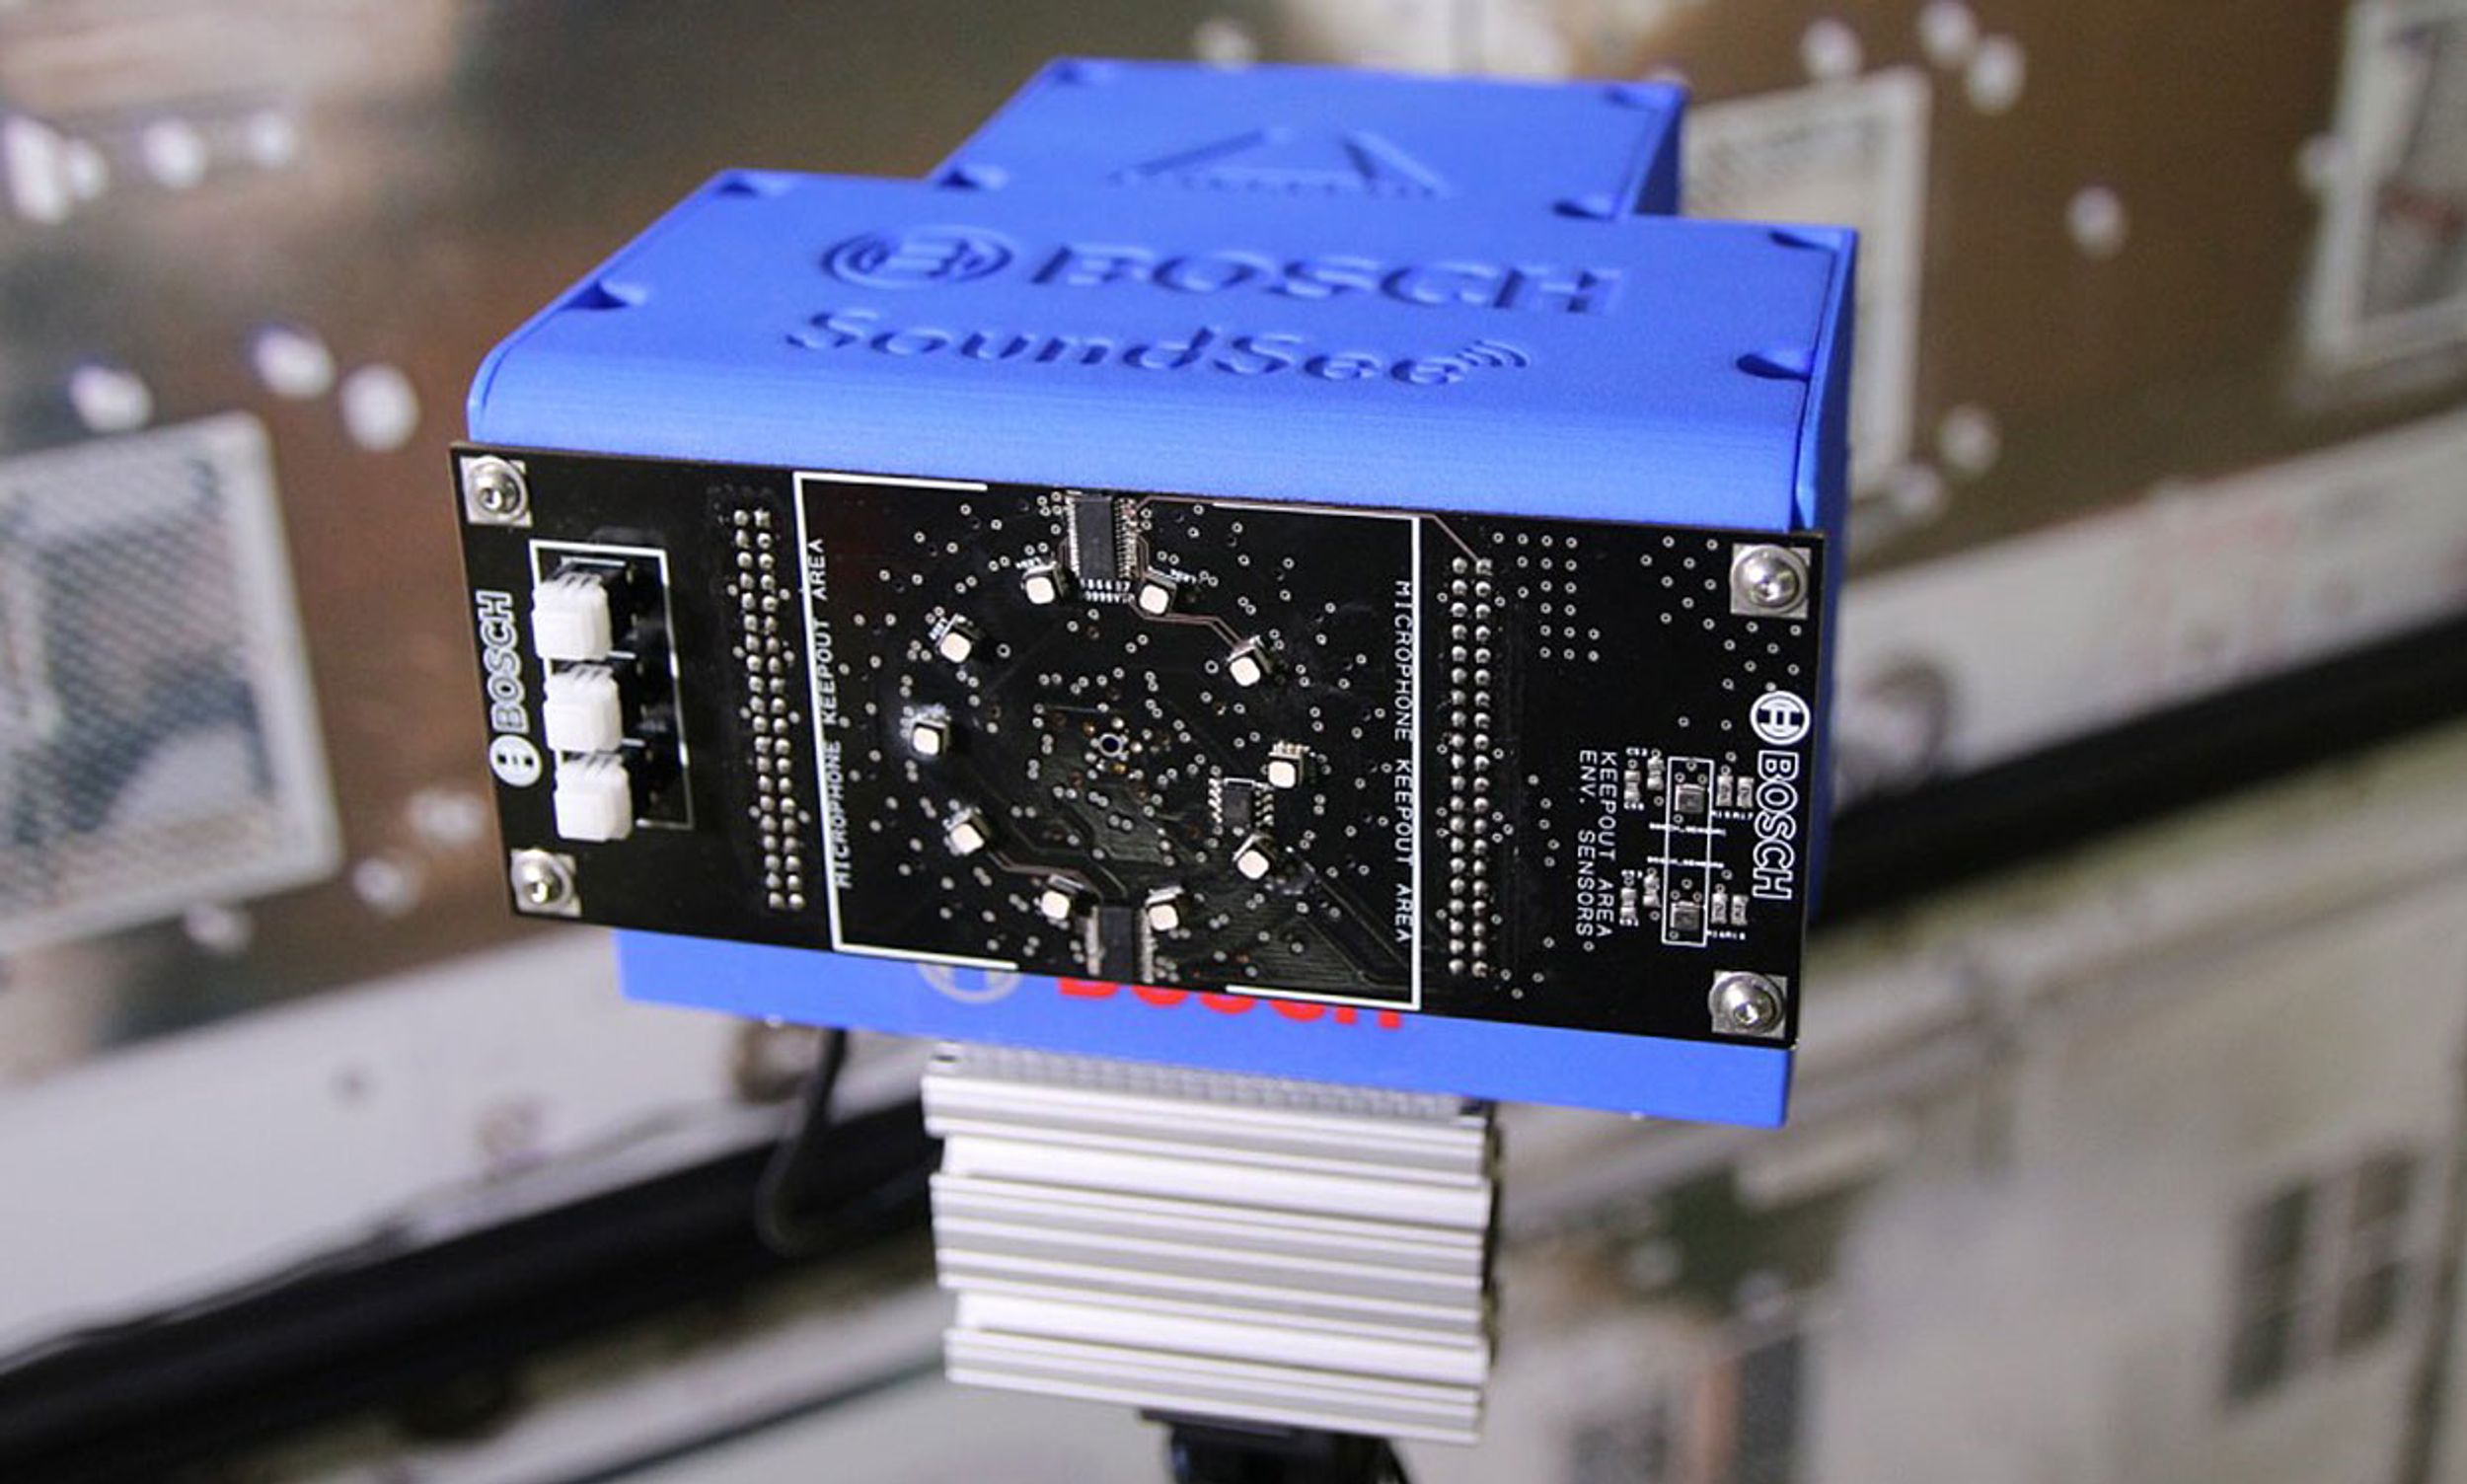 A rectangular blue box on a stand. The side closet to the viewer is covered with black printed circuit board, in the middle of which is 10 small white raised dots arranged in a ring